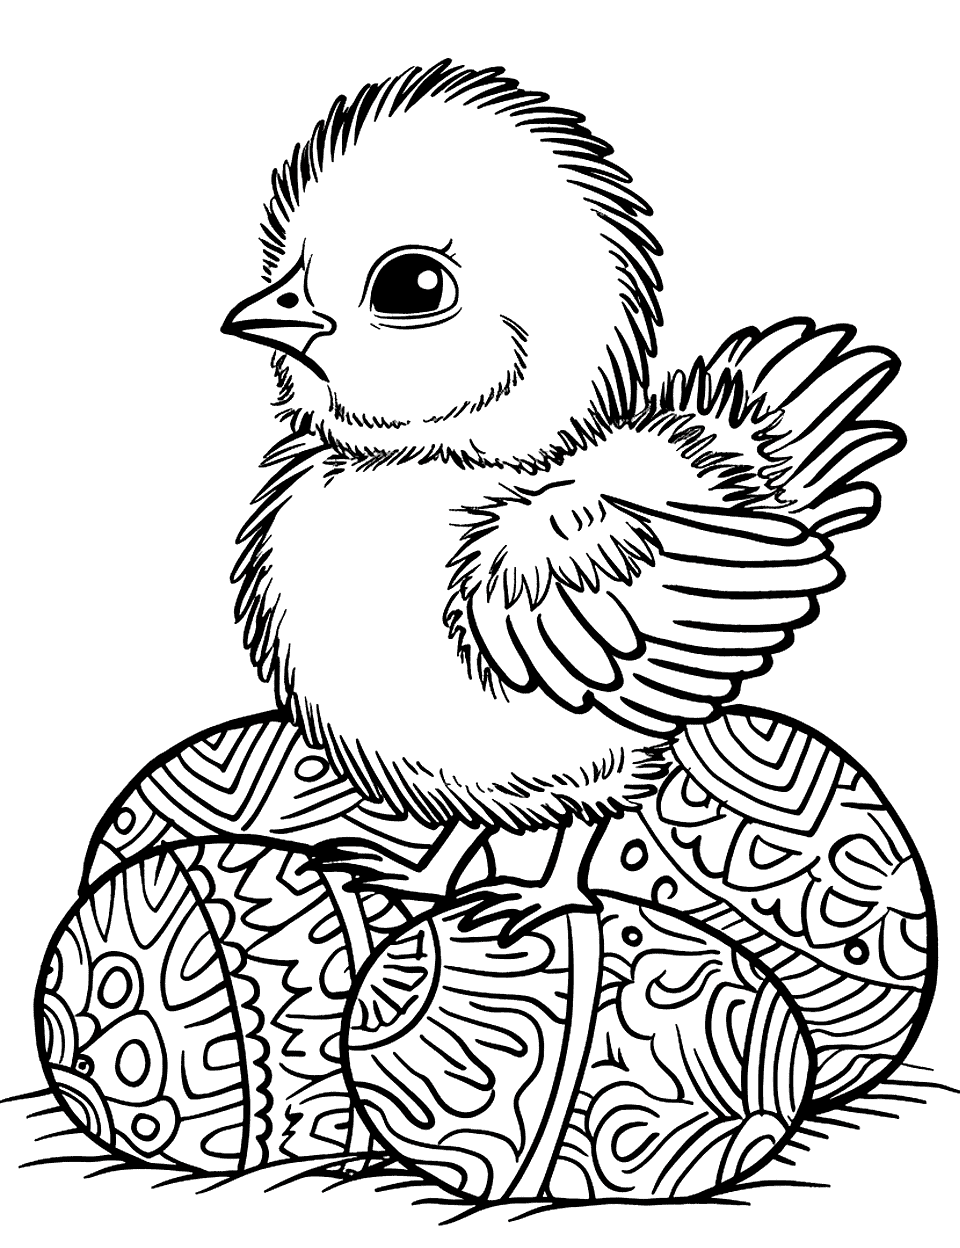 Chick with Easter Egg Patterns Chicken Coloring Page - A chick surrounded by eggs, each decorated with intricate Easter egg patterns.